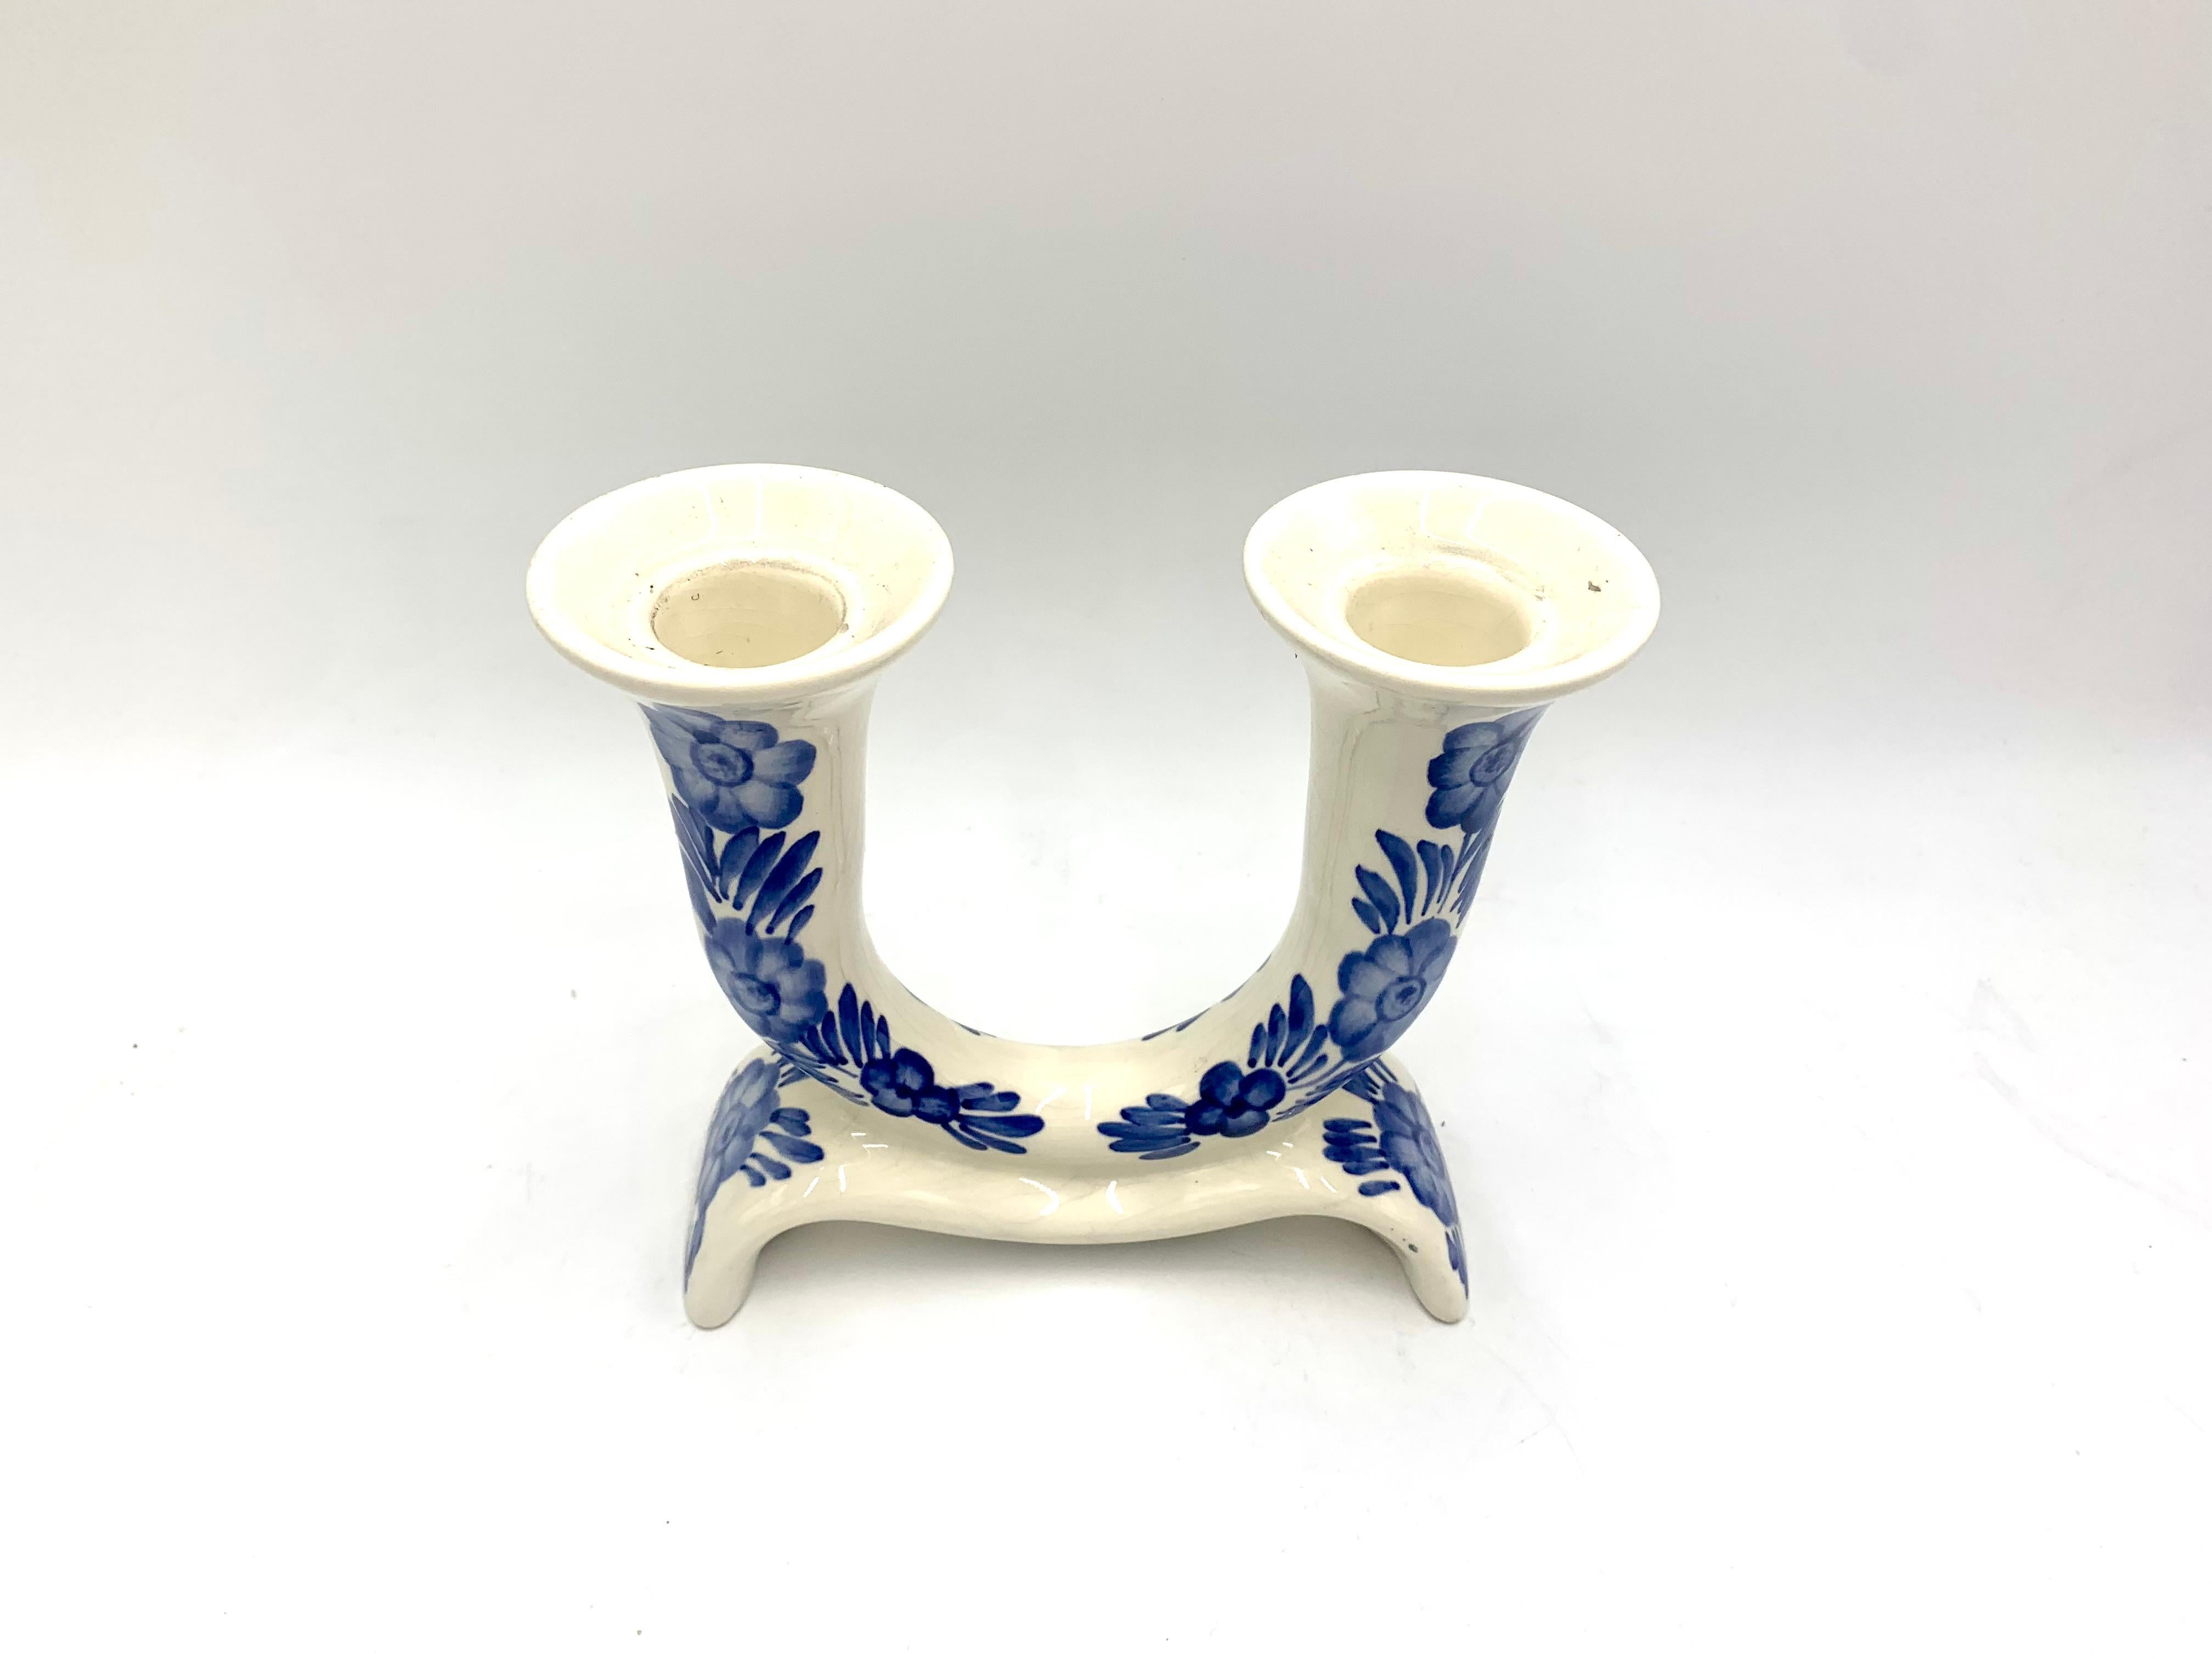 Earthenware candlestick produced in Poland in the 1960s.

Very good condition.

Measures: Height 16.5 cm; width 19cm.